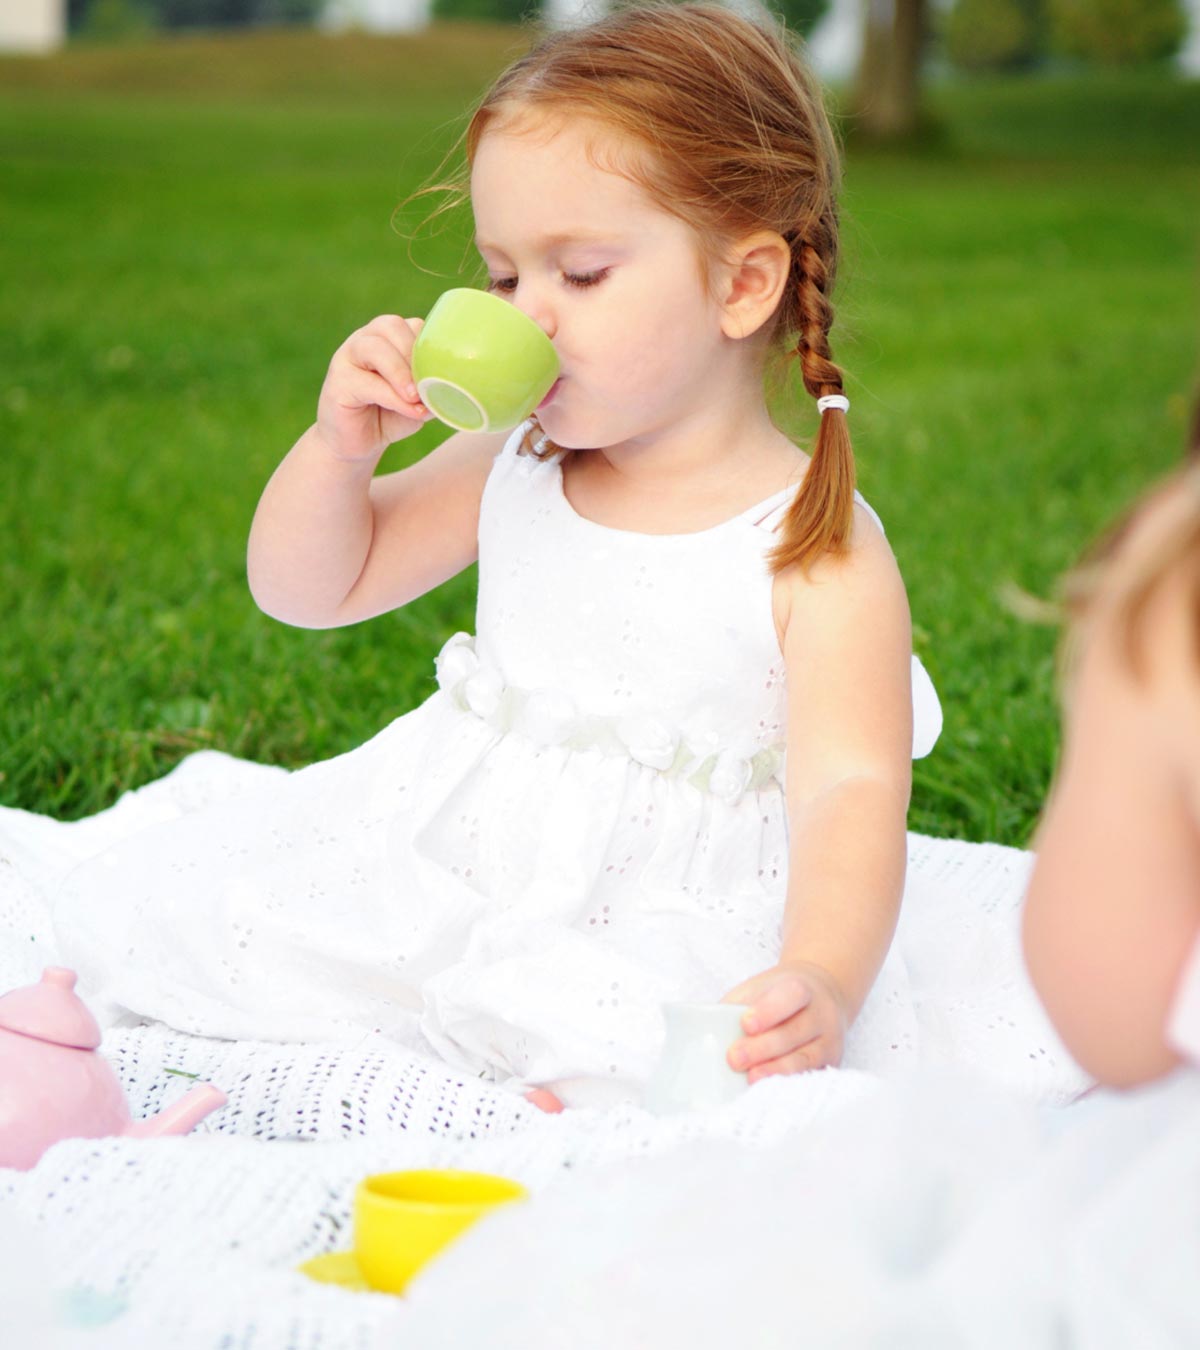 Is It Safe For Kids To Drink Tea?